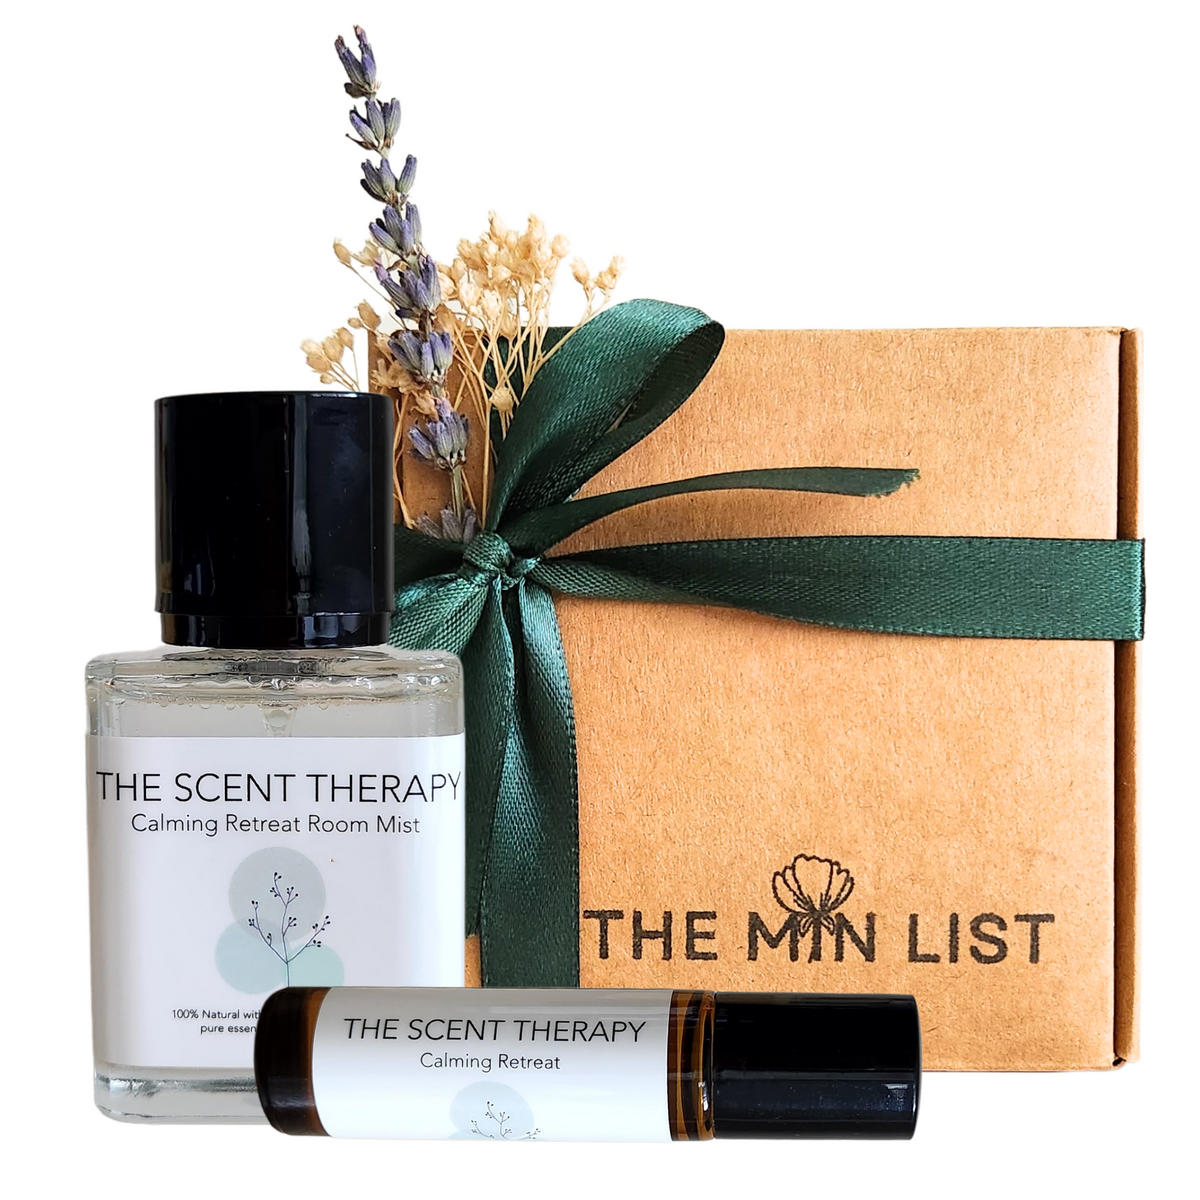 The Scent Therapy - Calming Retreat Set